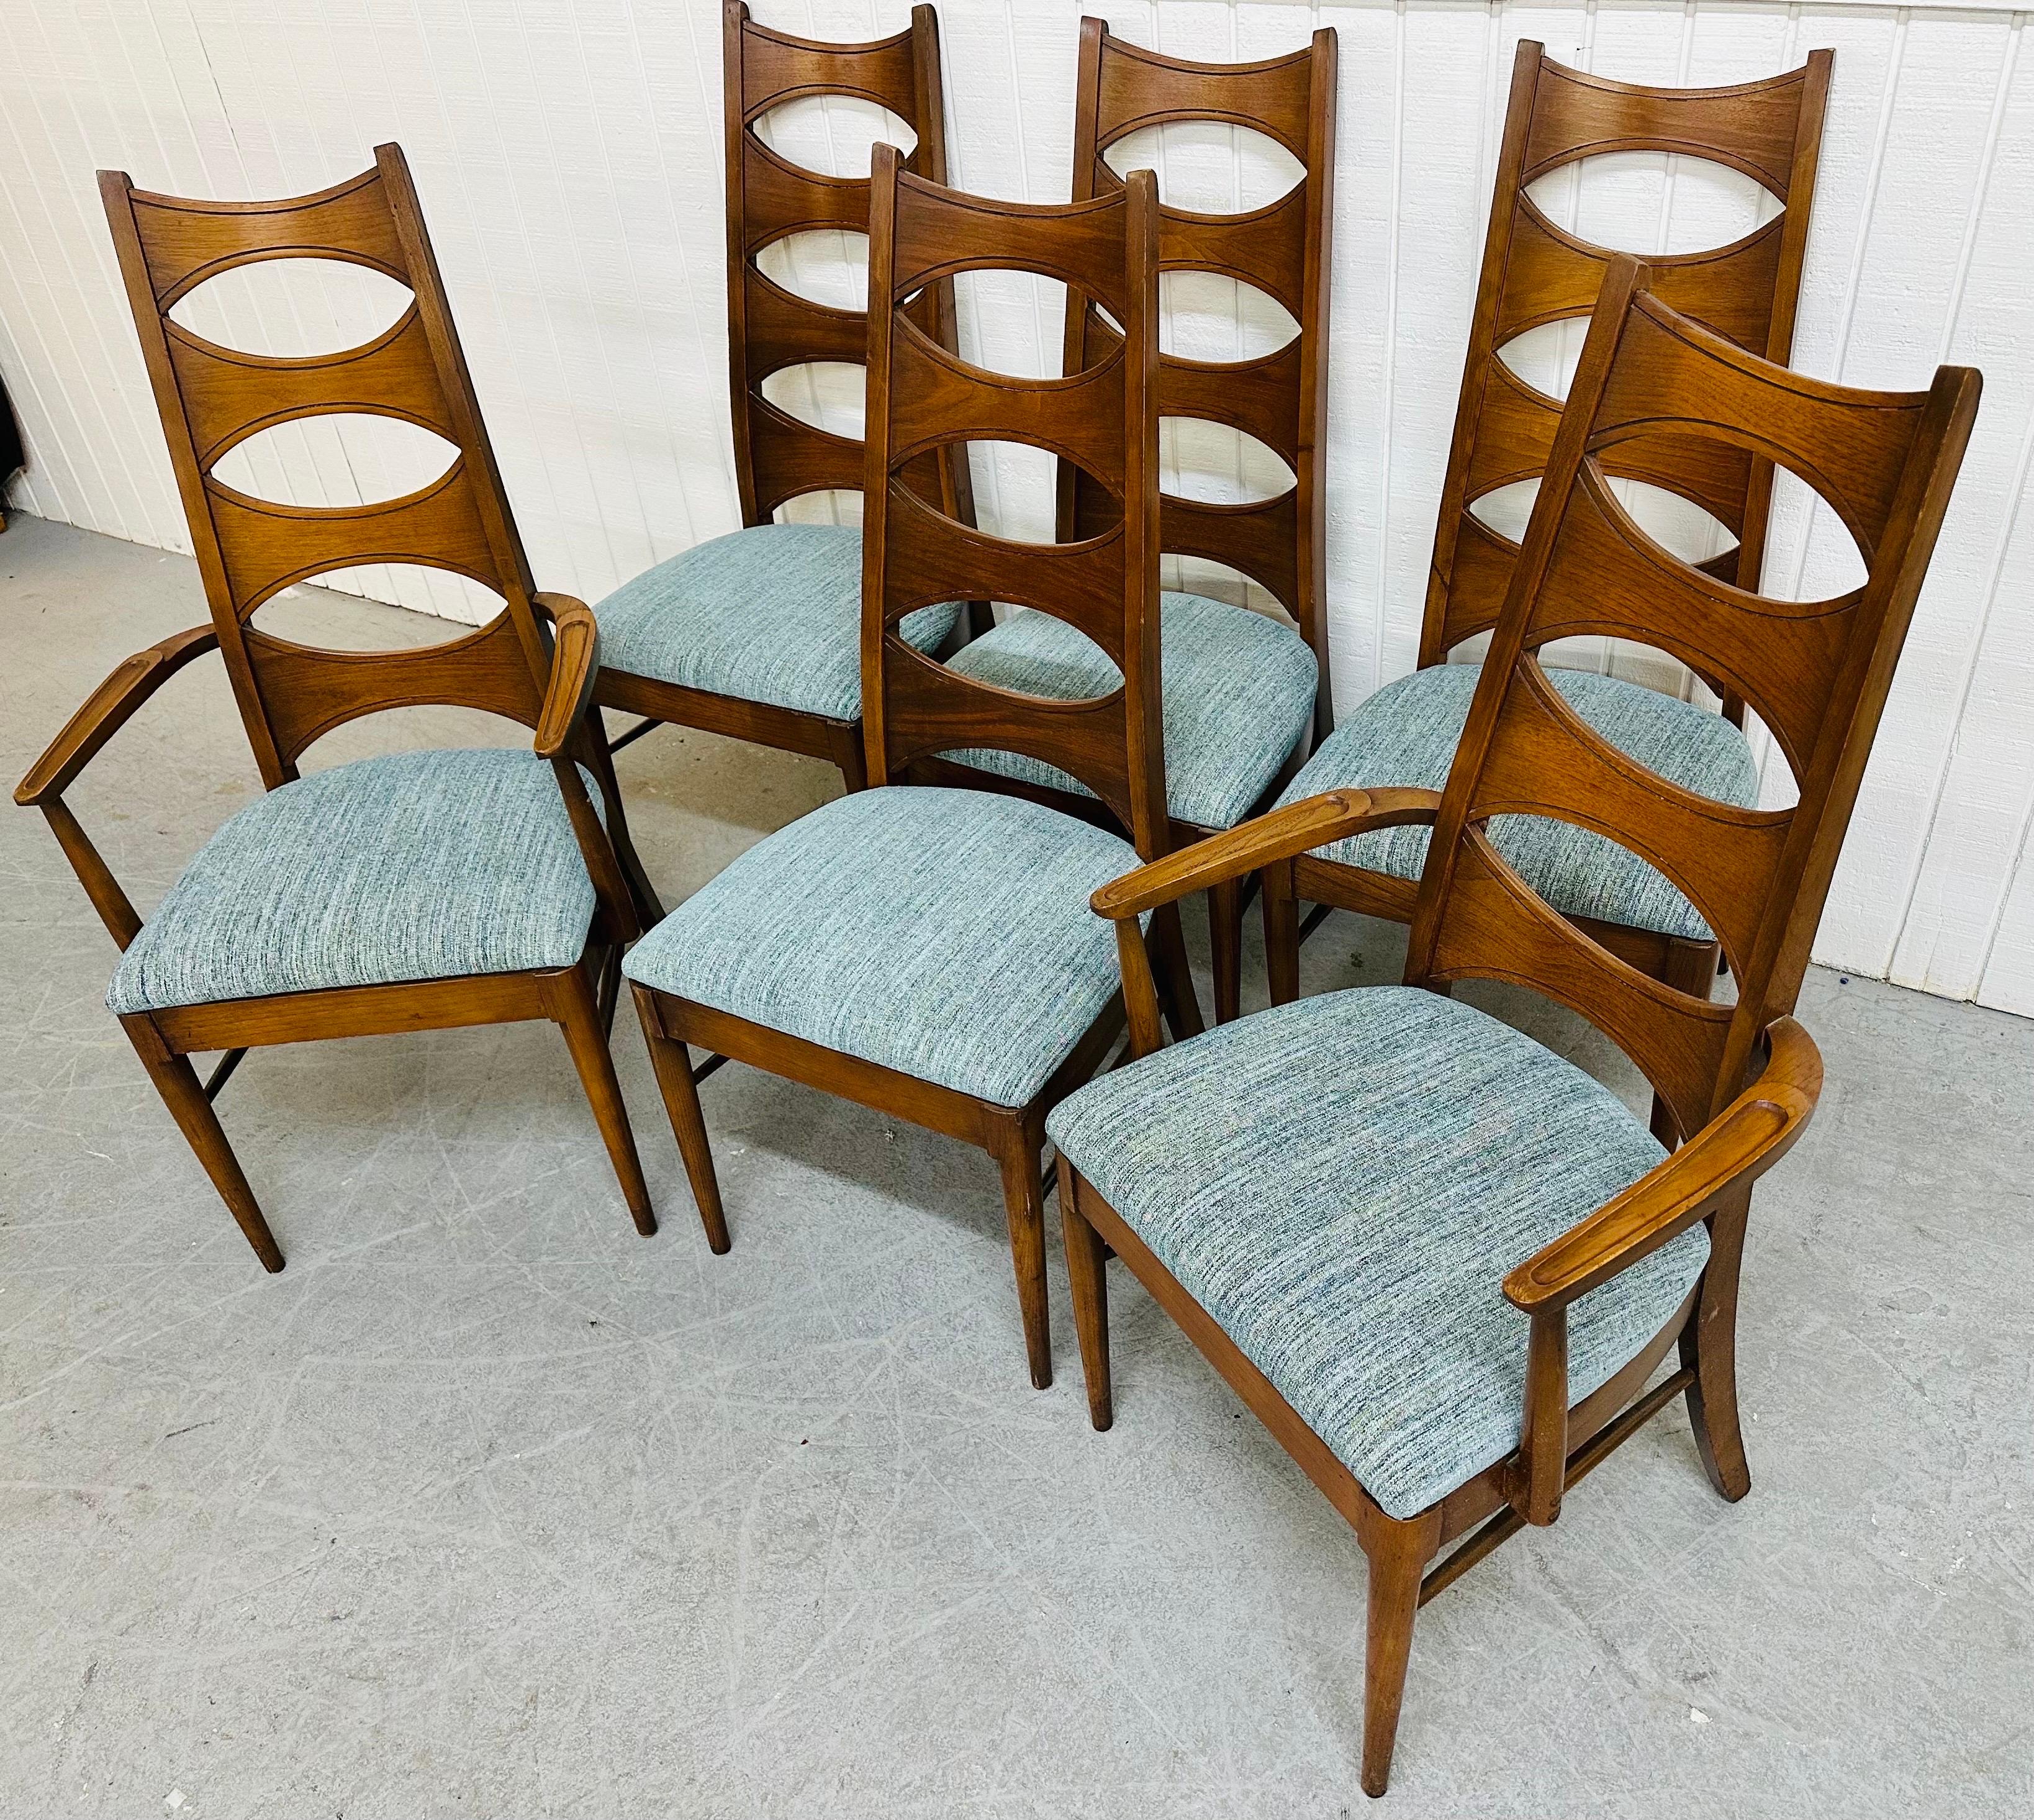 This listing is for a set of six Mid-Century Modern Kent Coffey Perspecta Walnut Dining Chairs. Featuring two arm chairs, four straight chairs, a high back cats eye design, newly upholstered seats, and a beautiful walnut finish. This is an